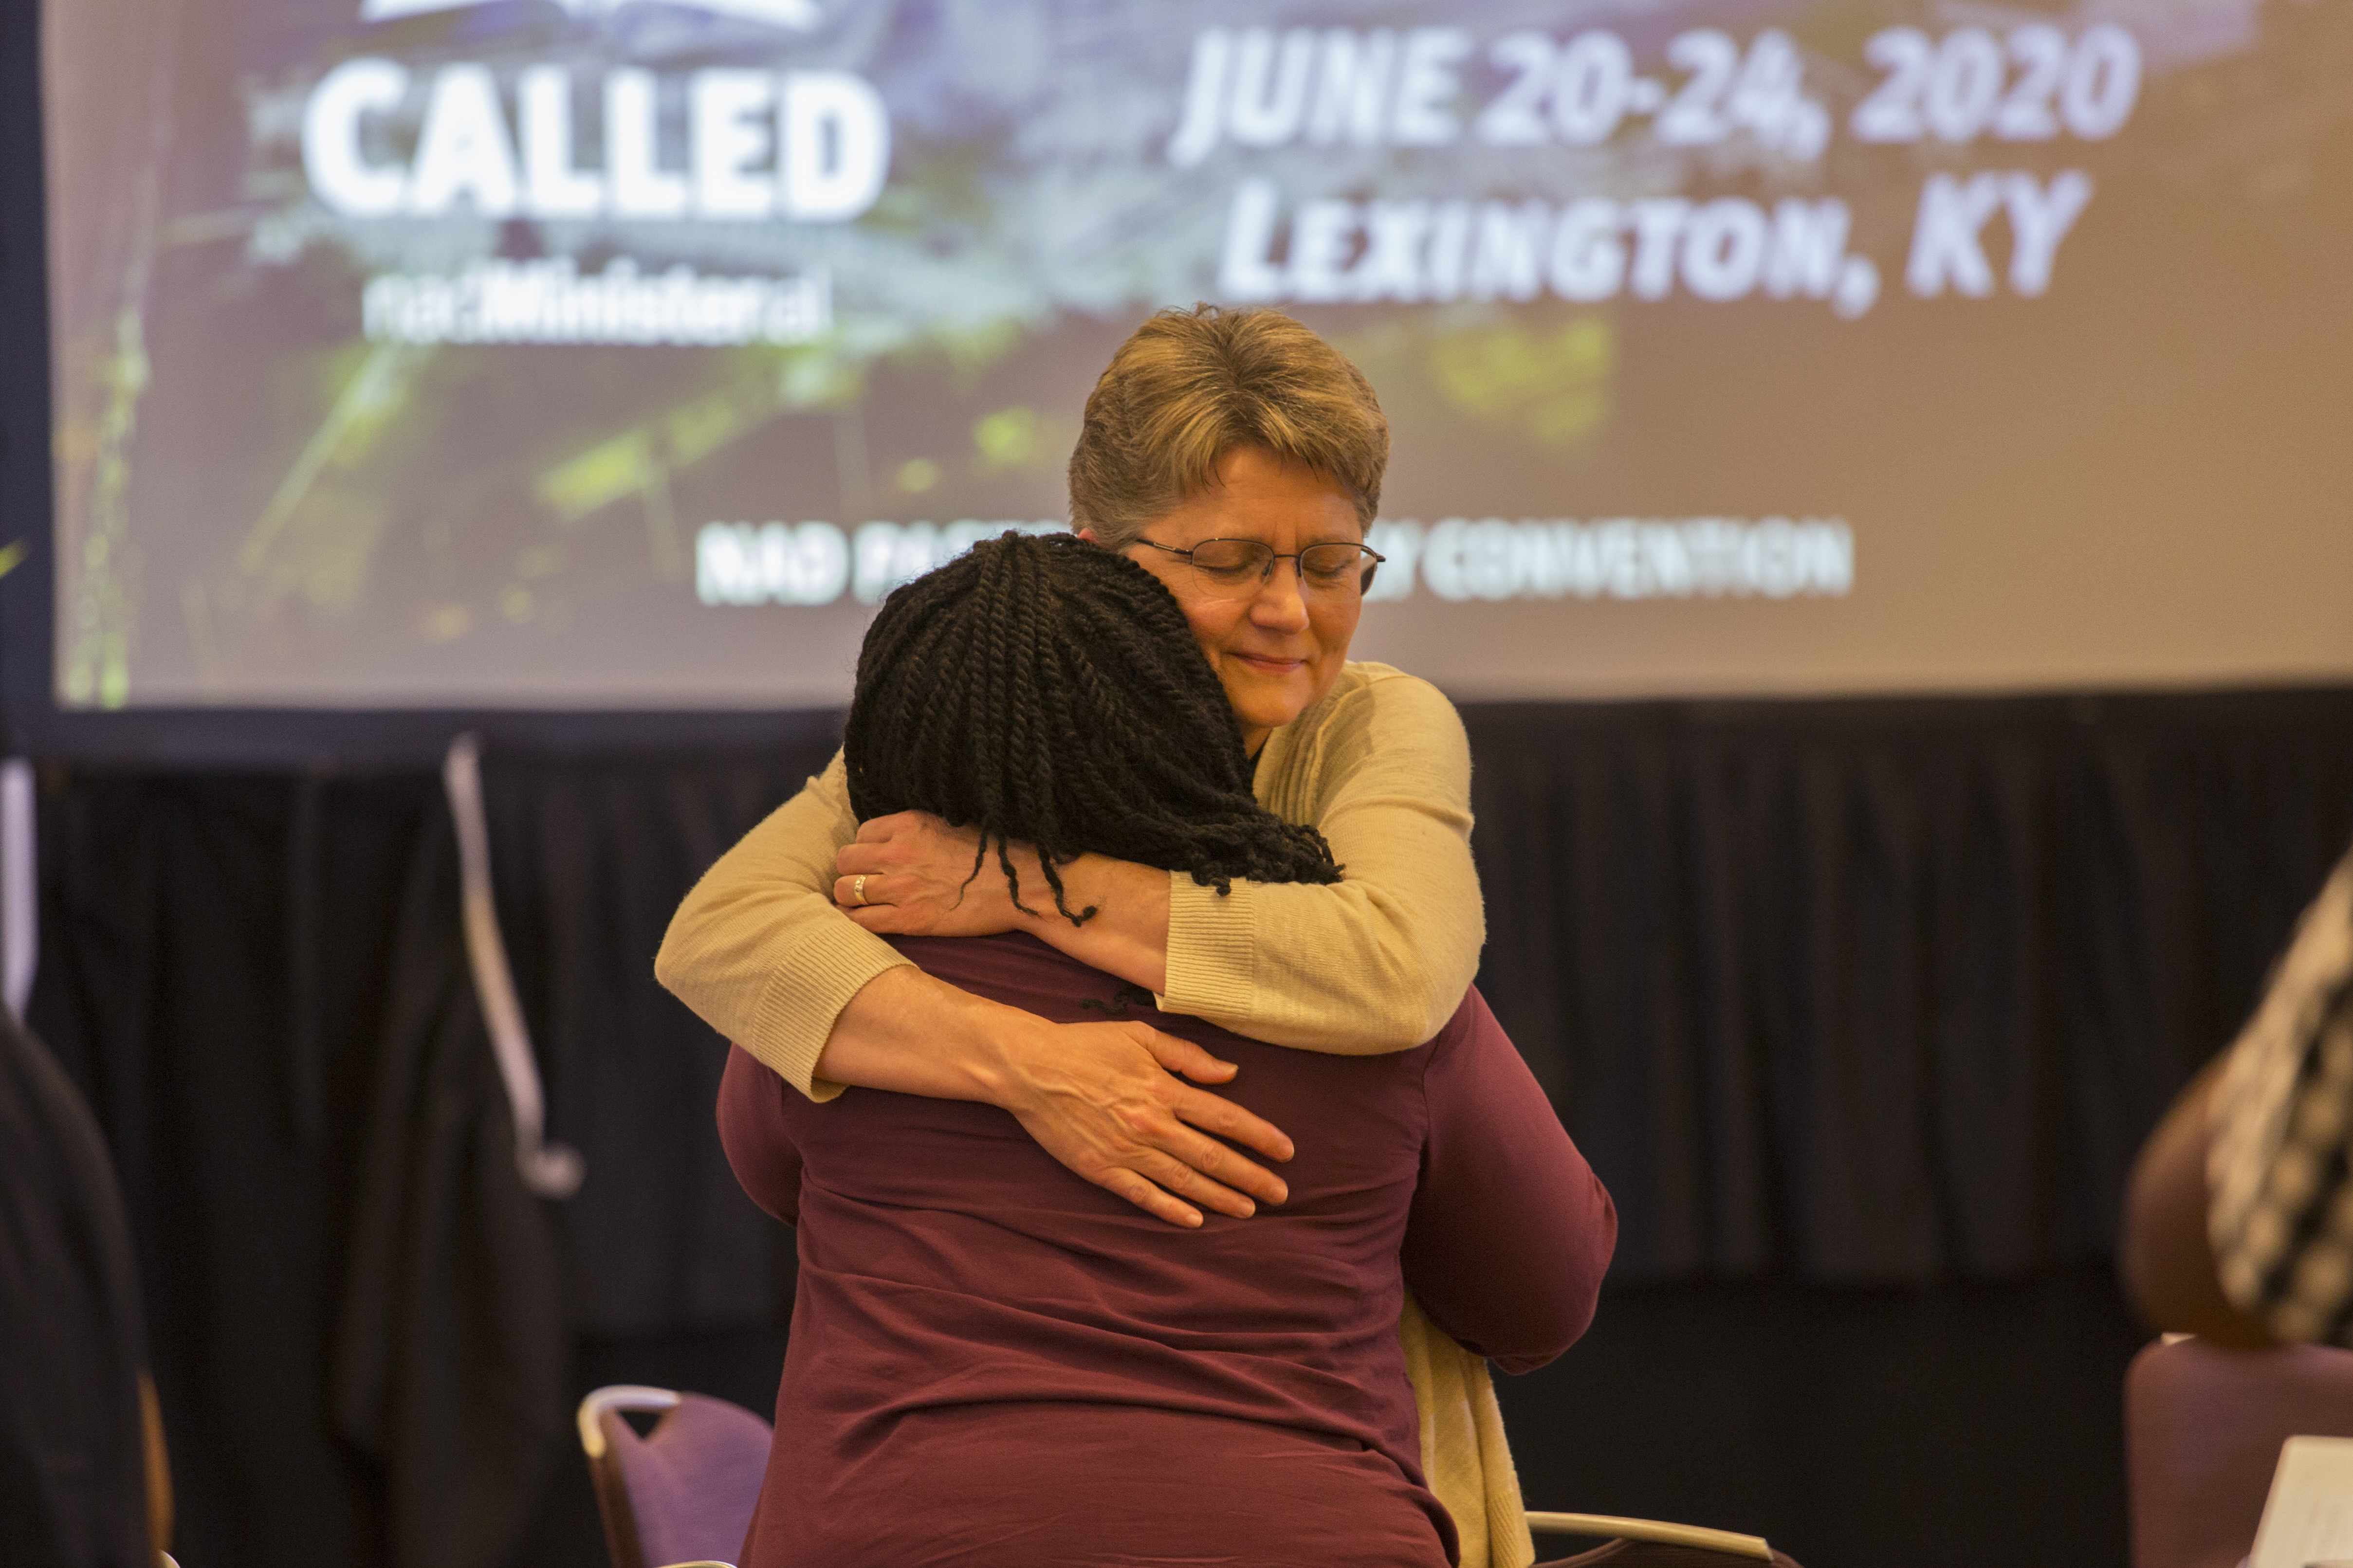 The clergy seized every opportunity to encourage each other through prayer, and expressions of support and love.